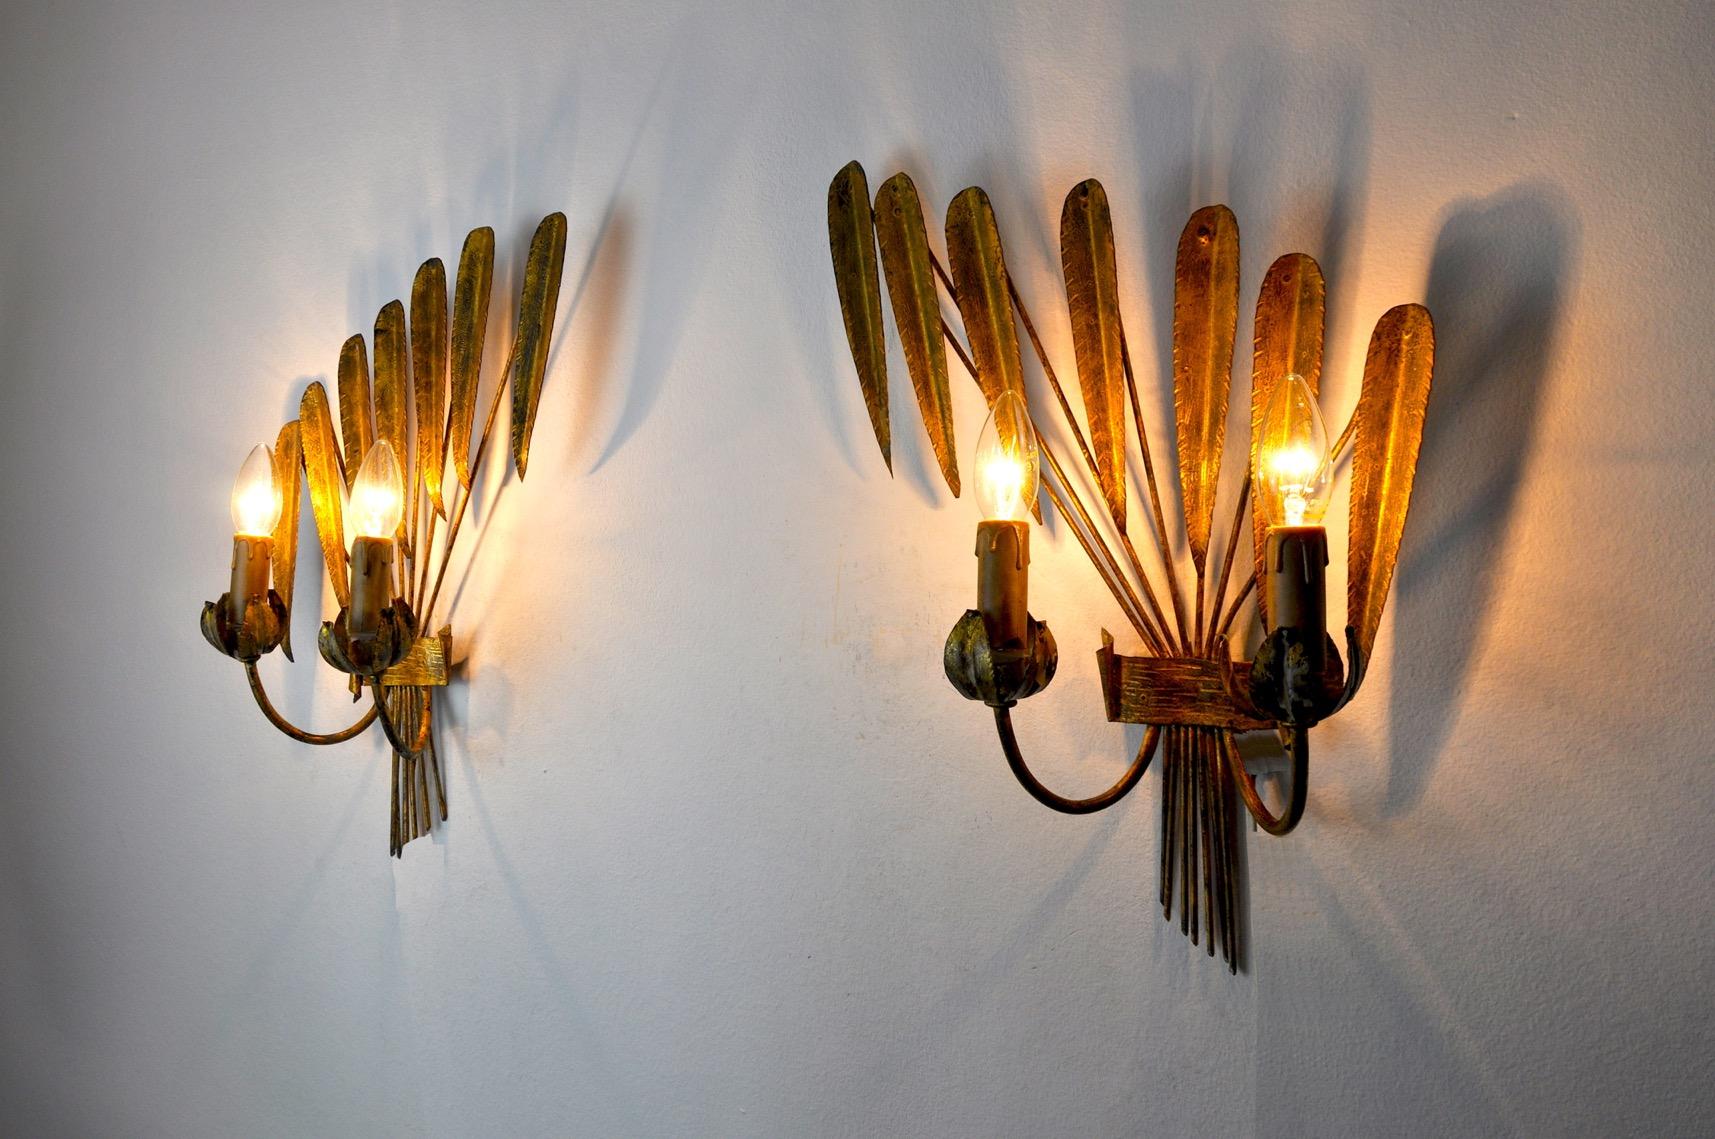 Mid-20th Century Pair of Floral Sconces by Ferro Arte, Gold Leaf, Spain, 1960 For Sale